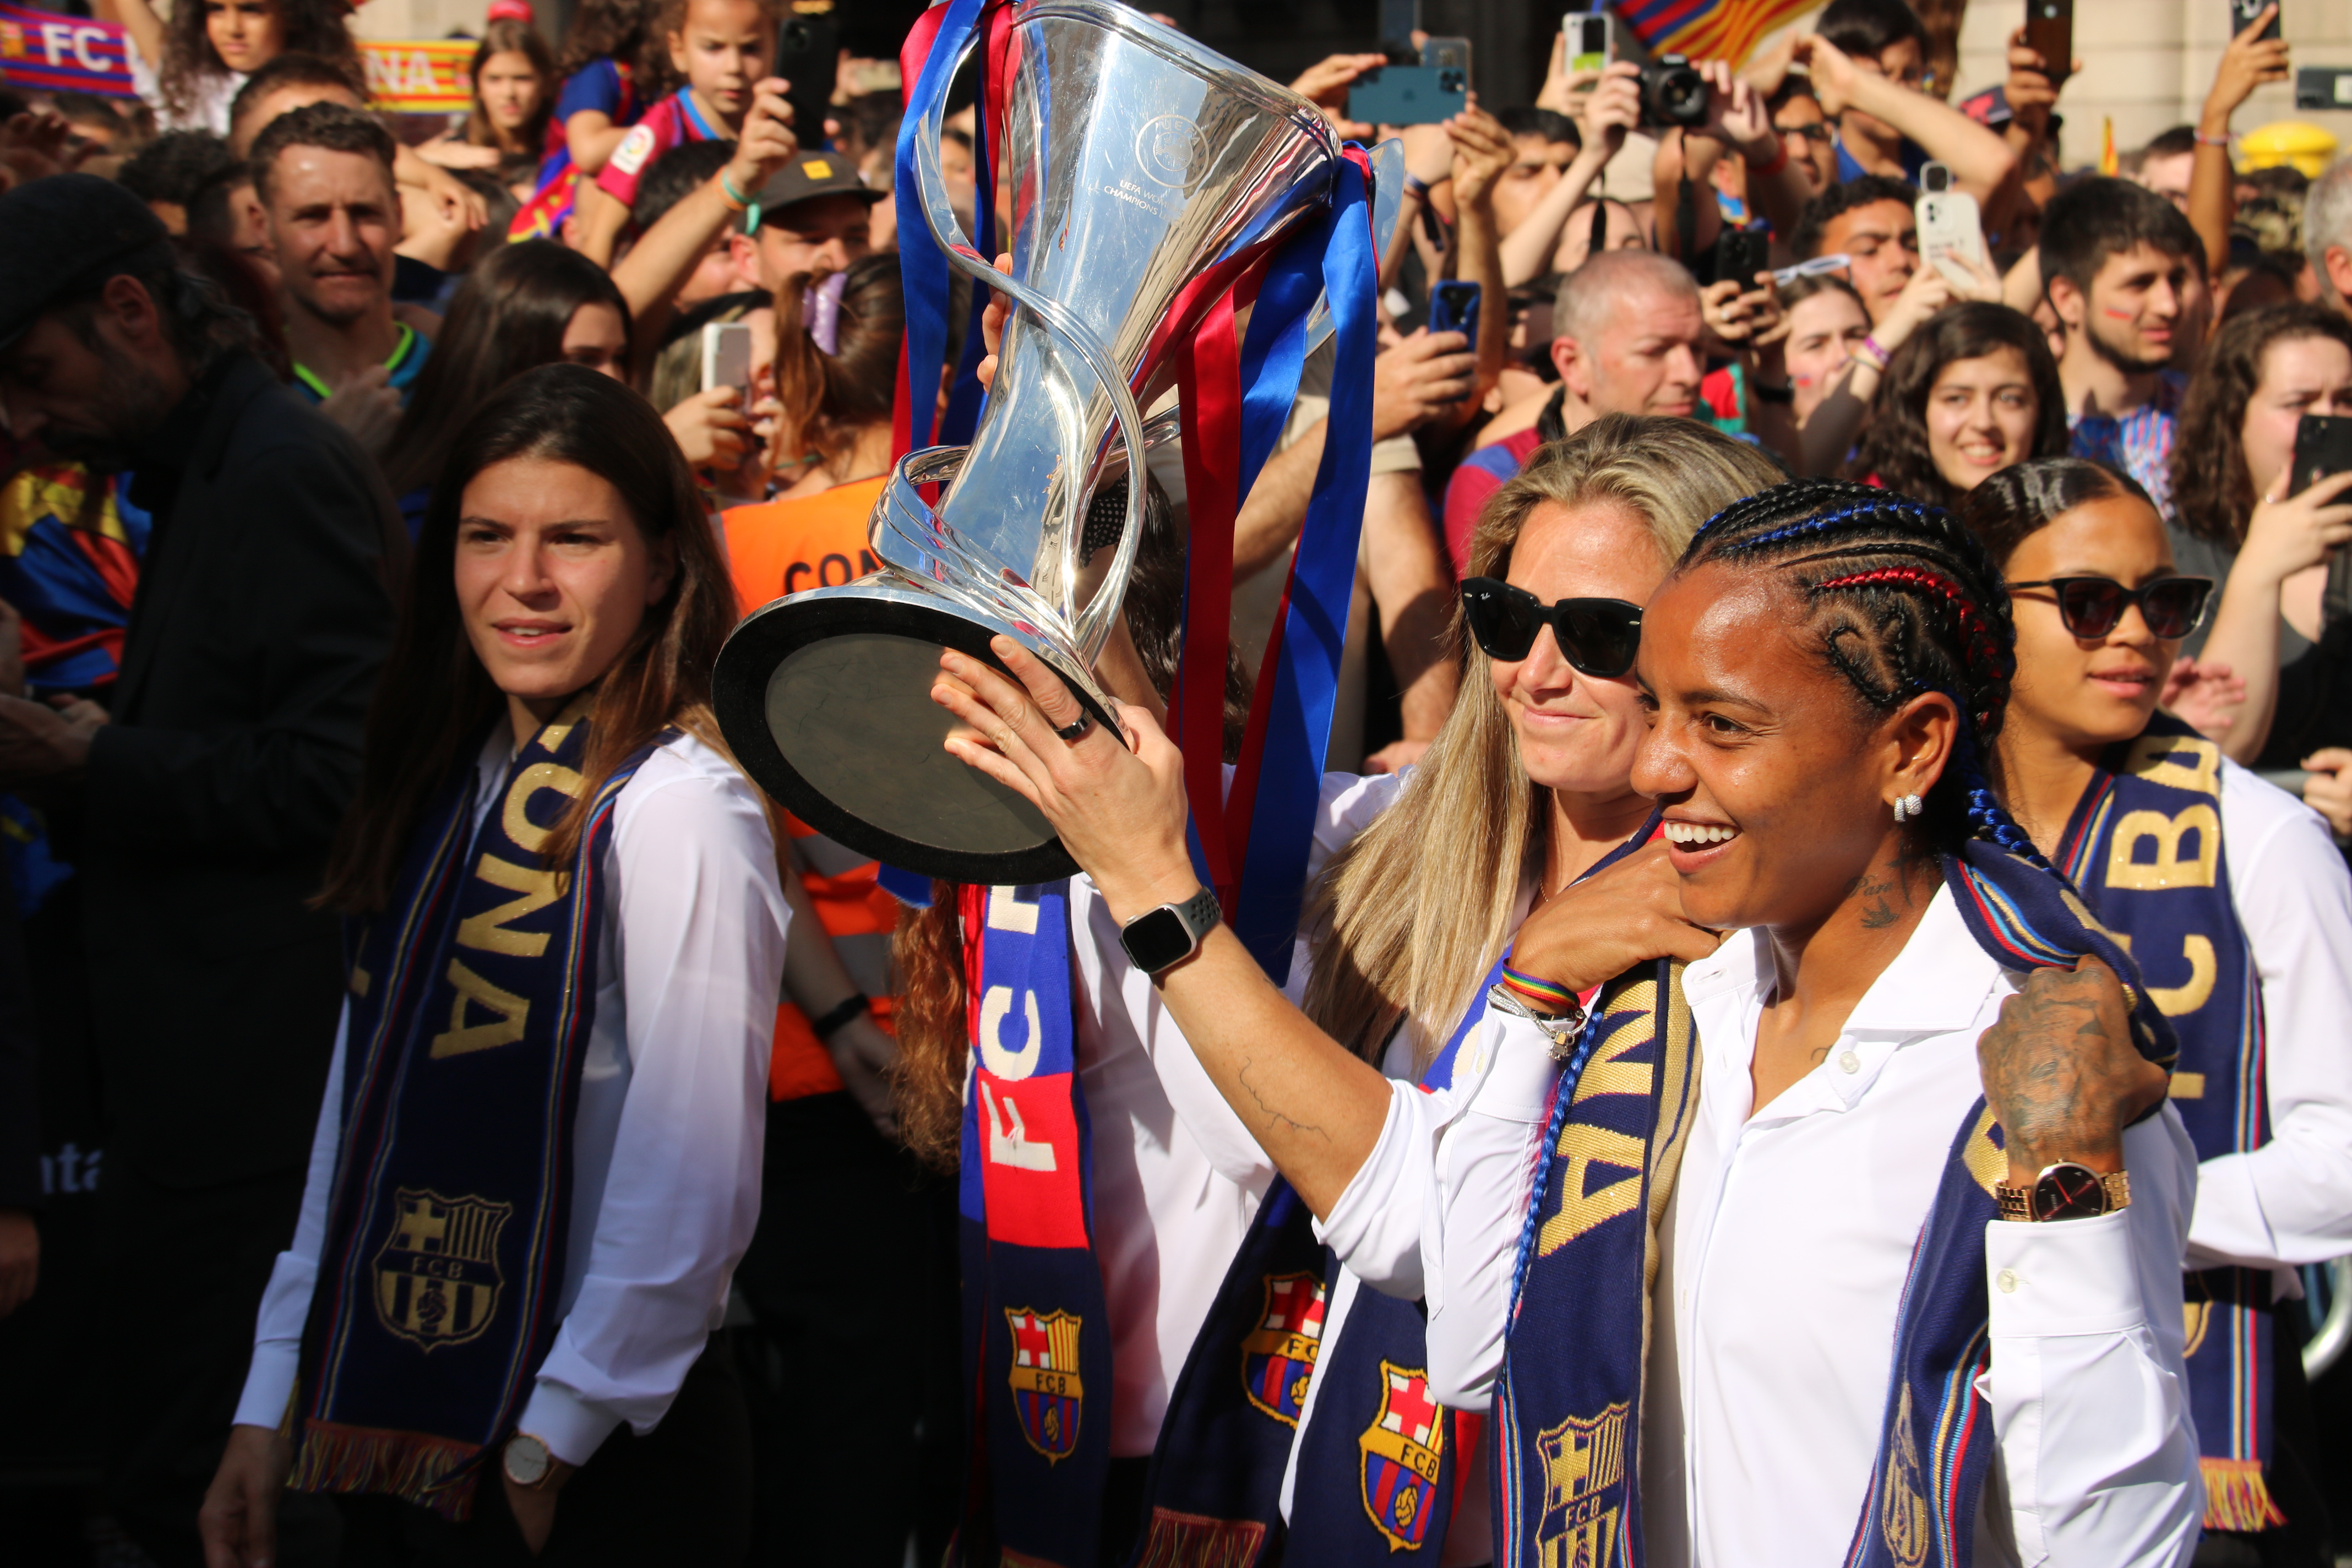 UEFA Women's Champions League trophy in the hands of the FC Barcelona team on June 4, 2023